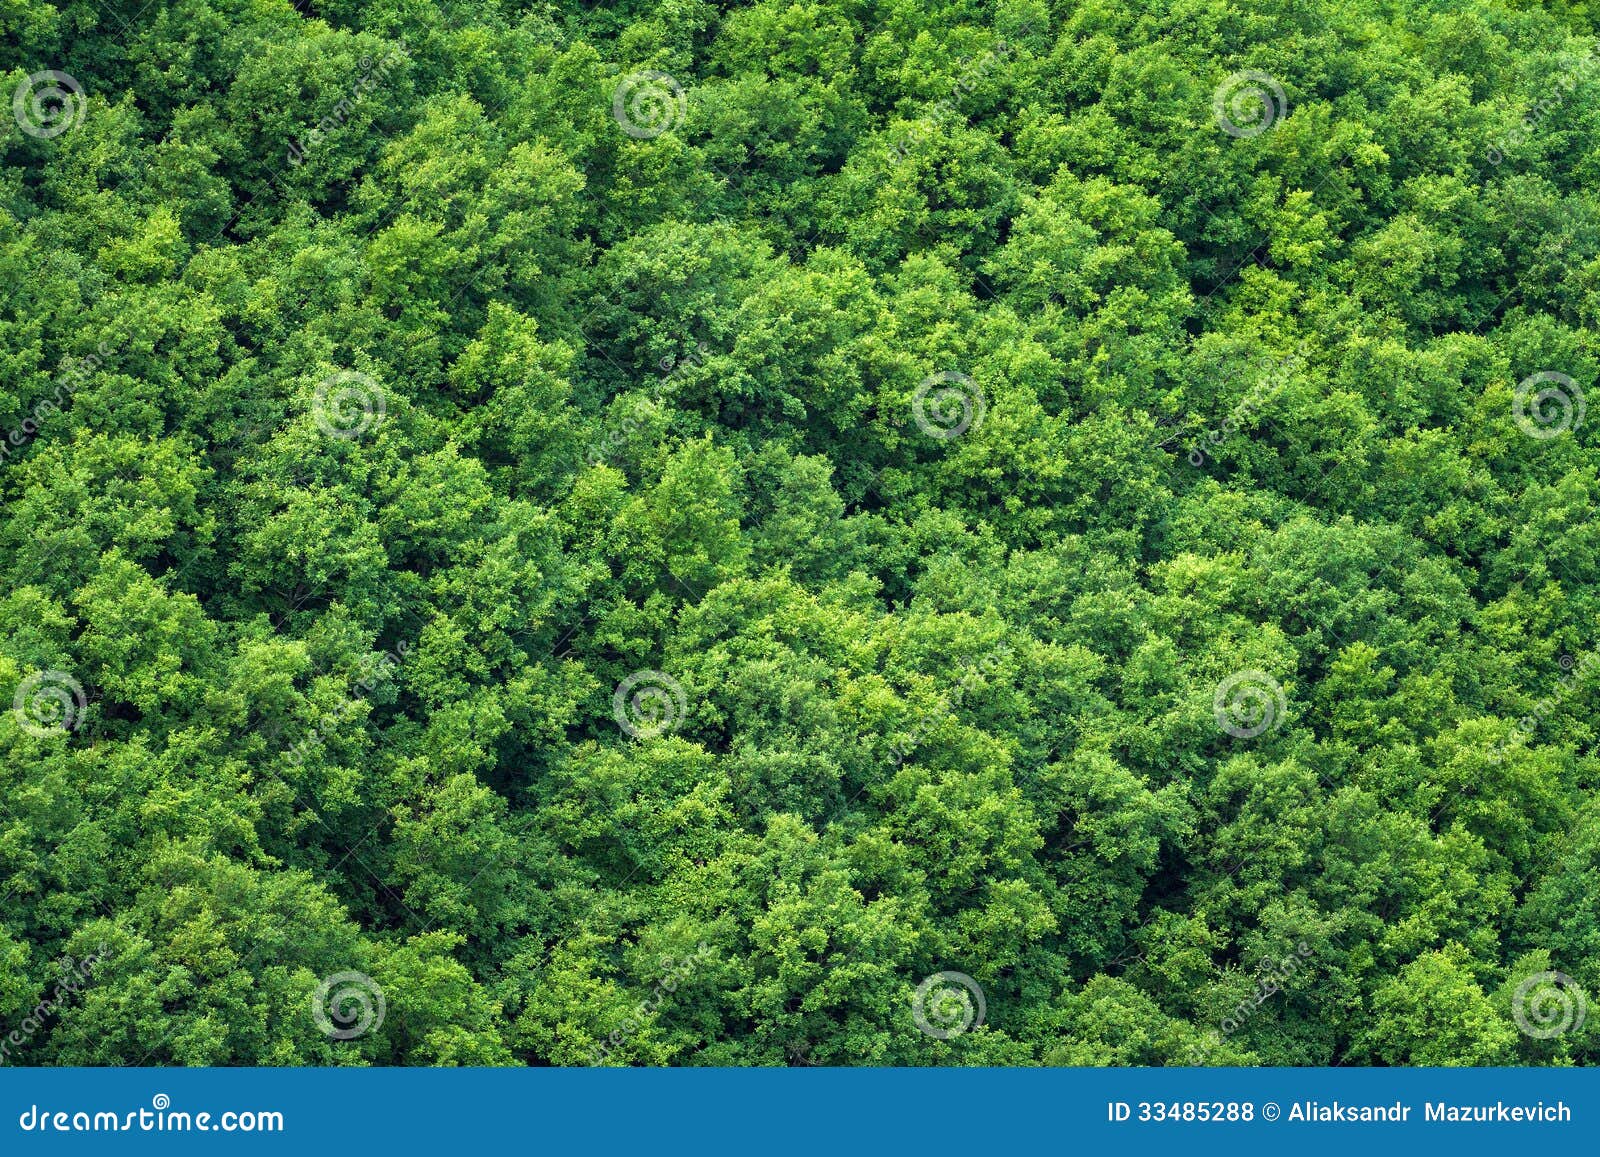 green-trees-forest-background-beautiful-33485288.jpg